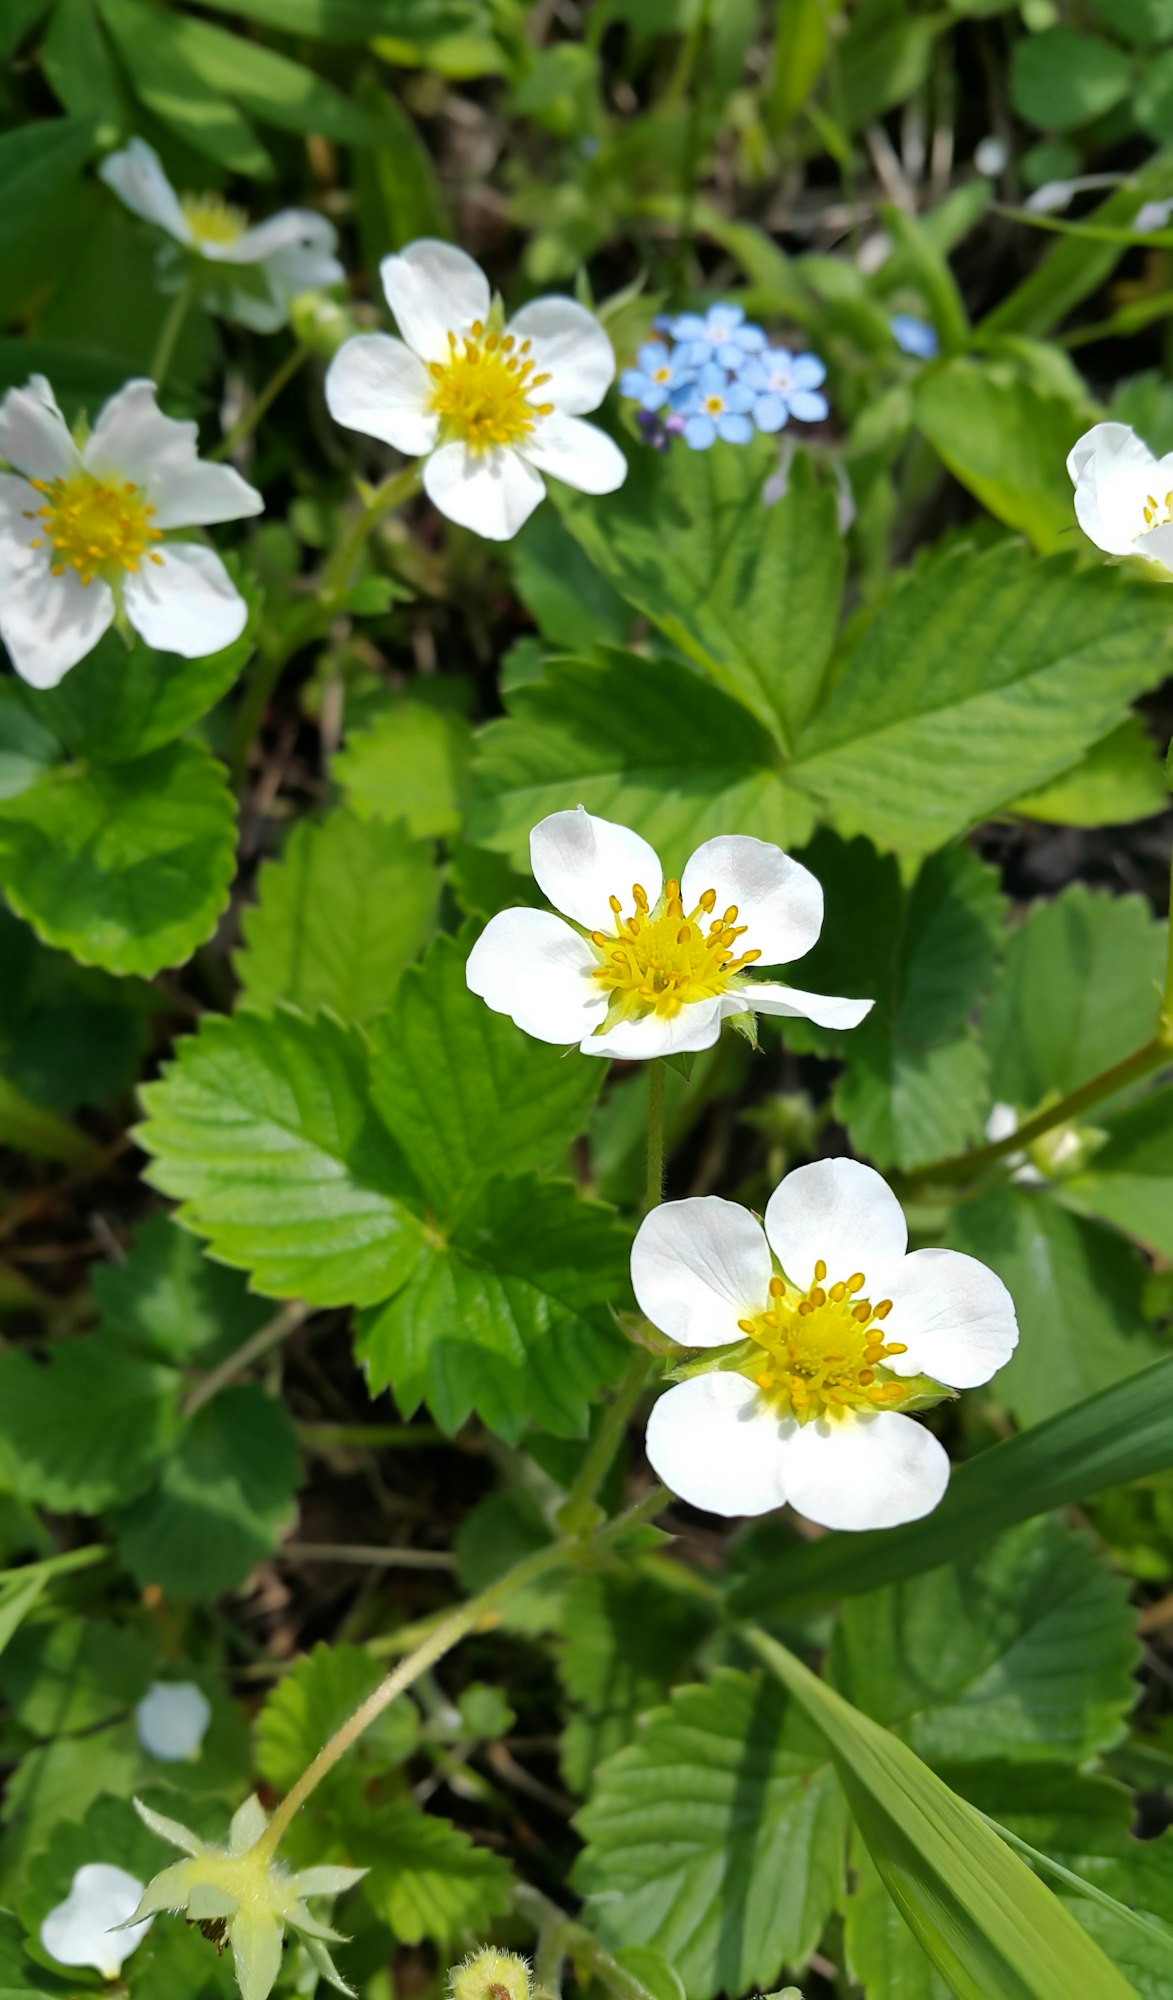 Flowers and leaves of strawberry